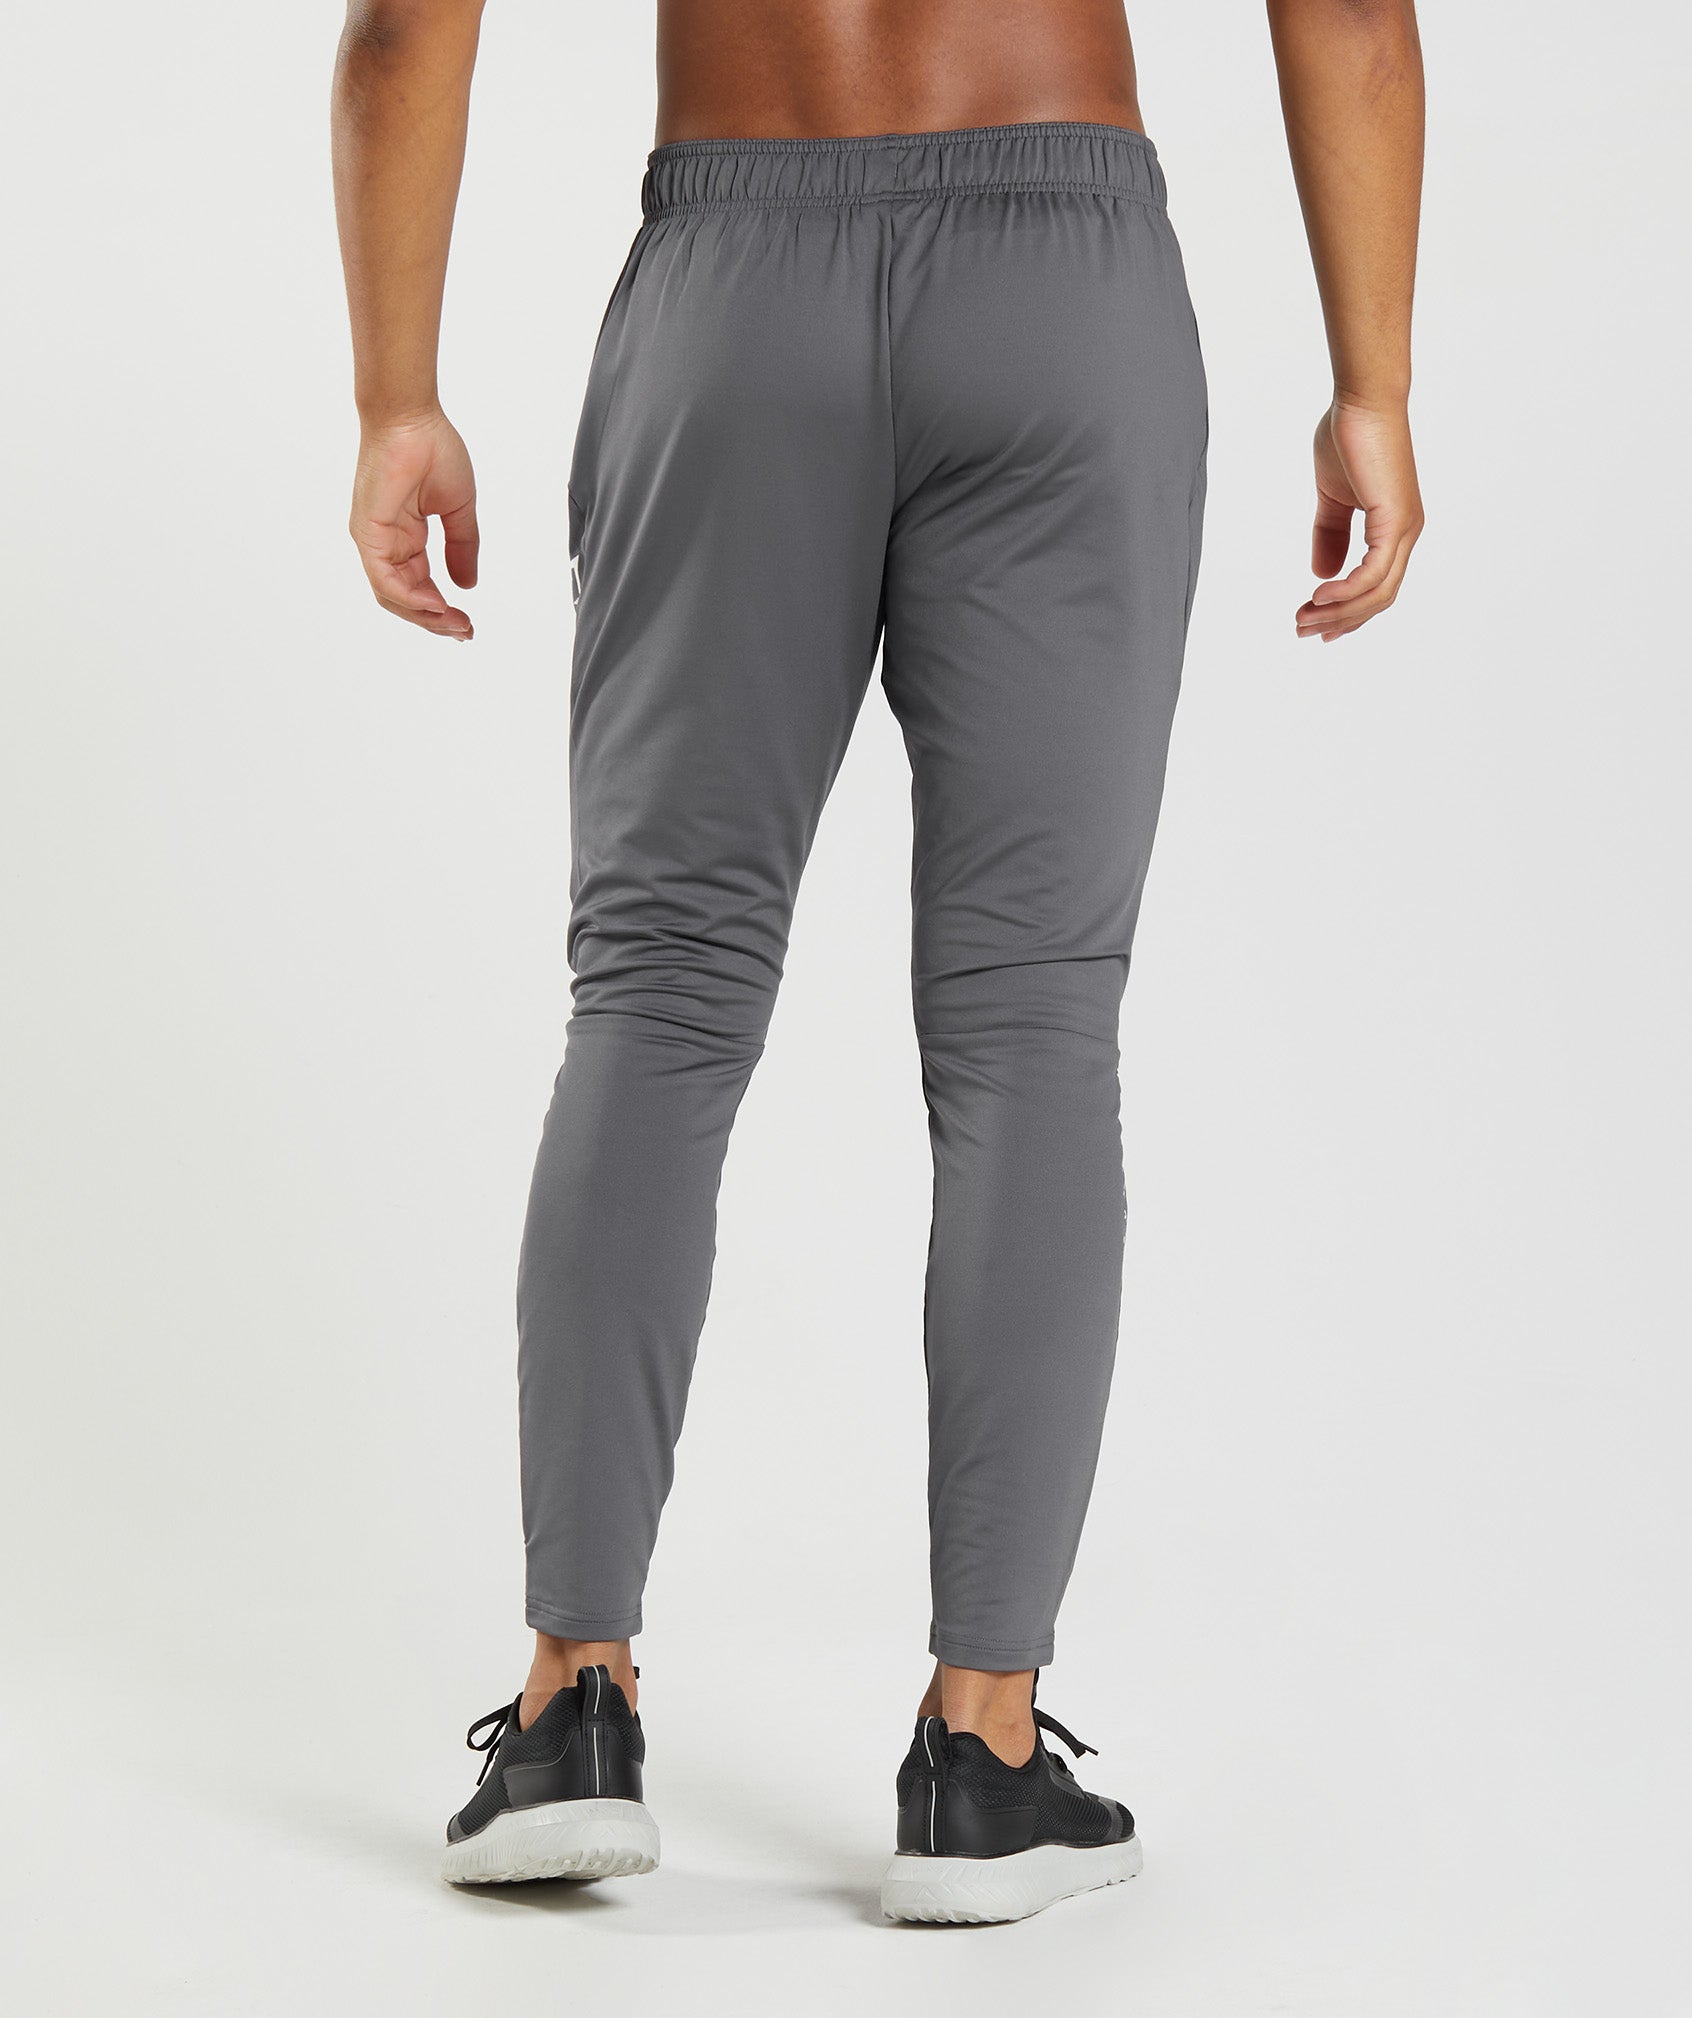 Gymshark Navy Crest Joggers L – Green Heart Collective